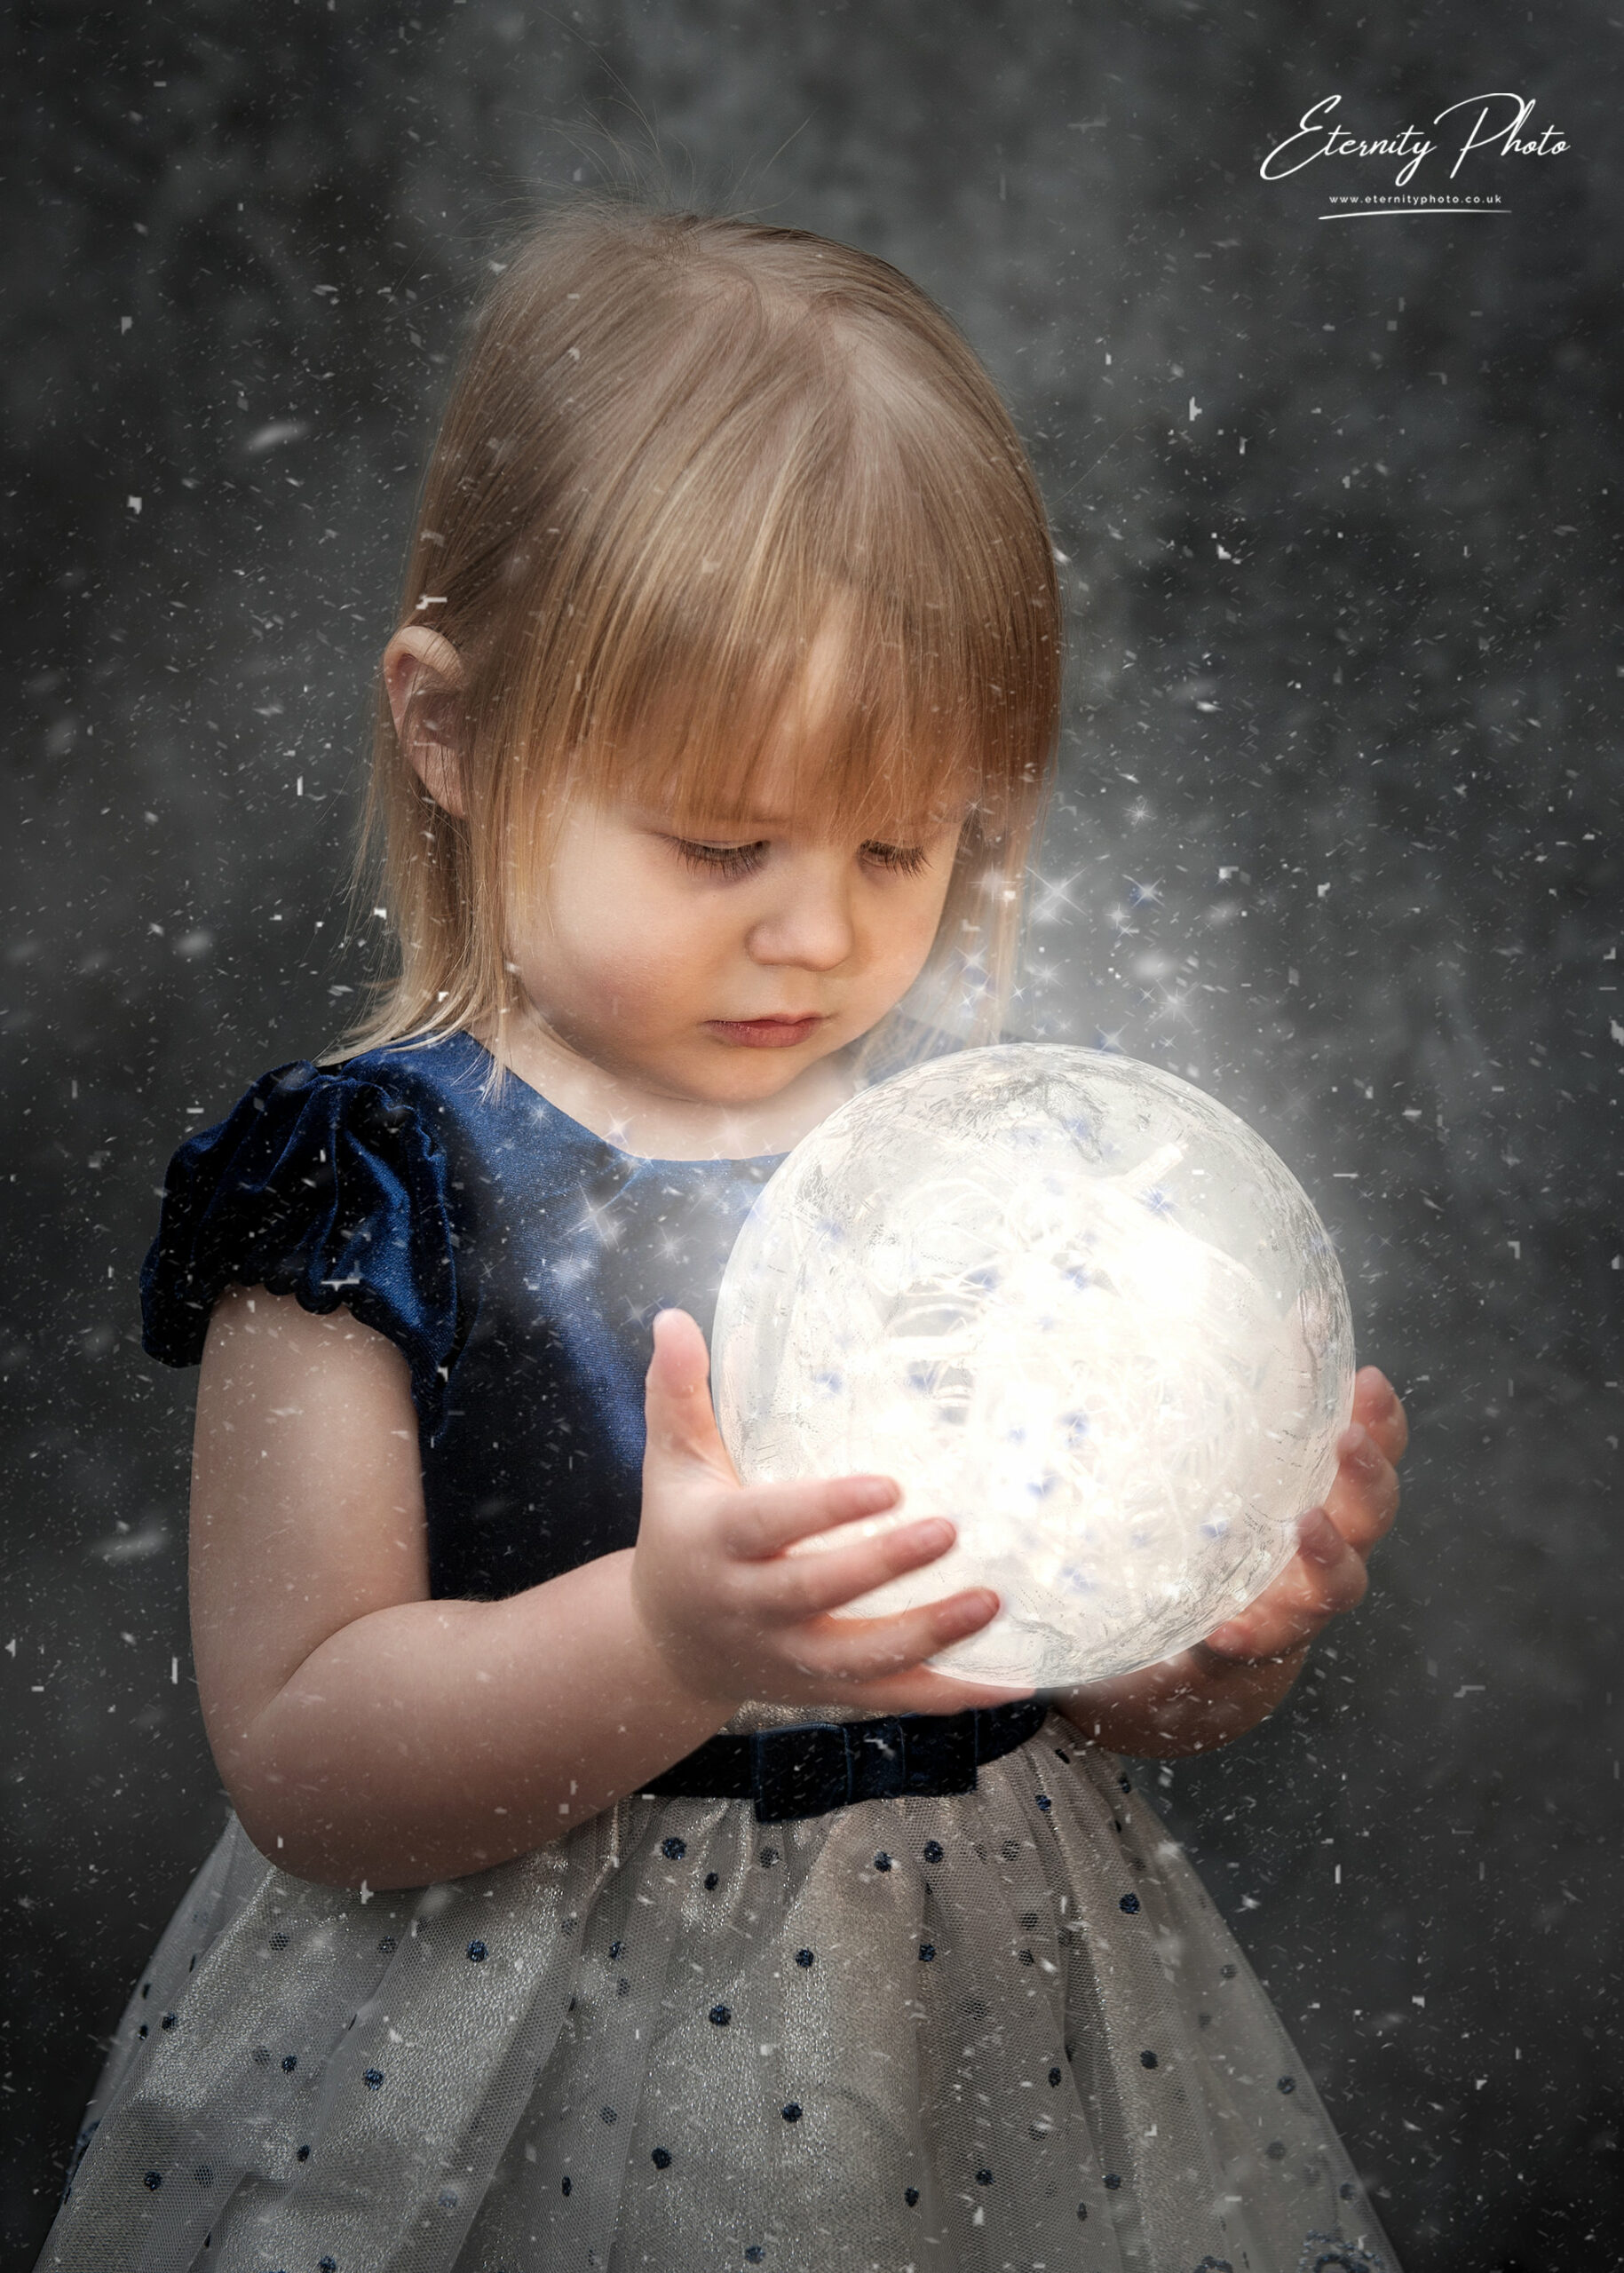 Child holding glowing orb in snow.